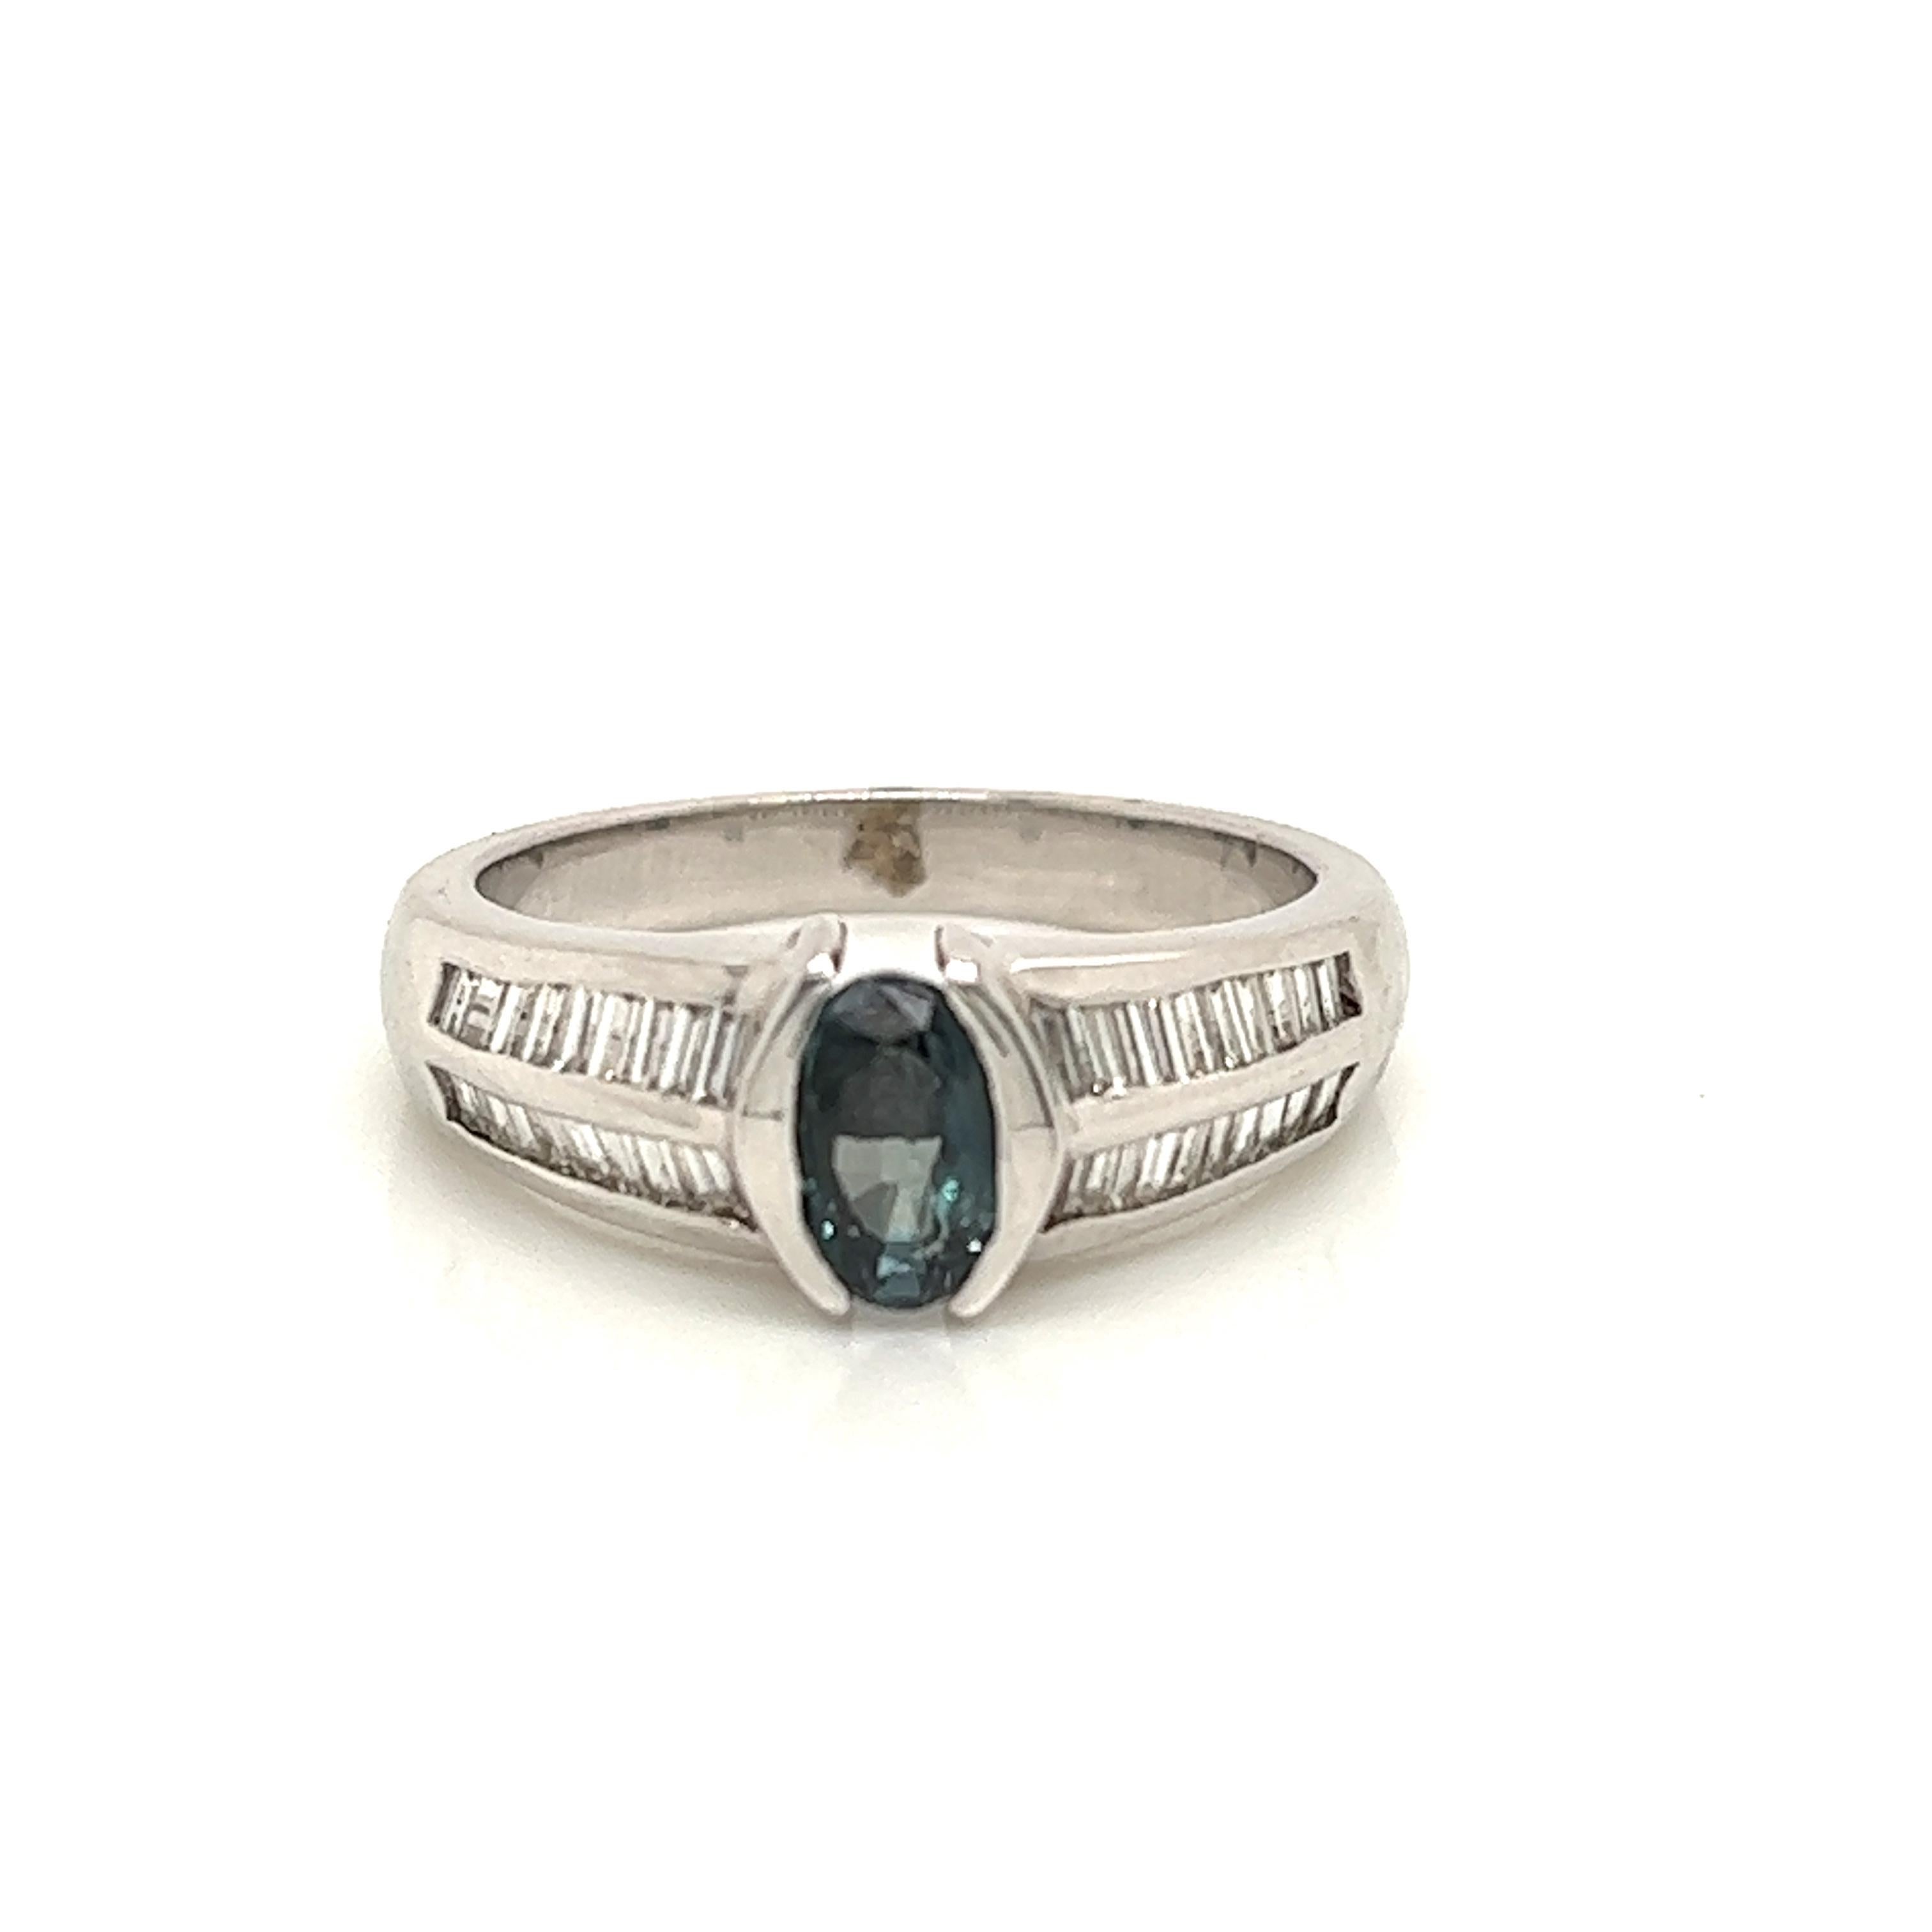 This is a gorgeous natural AAA quality Oval Alexandrite with Baguette diamonds that is set in solid 18K white gold. This ring features a natural 1.04 carat oval alexandrite that is certified by the Gemological Institute of America (GIA). The ring is